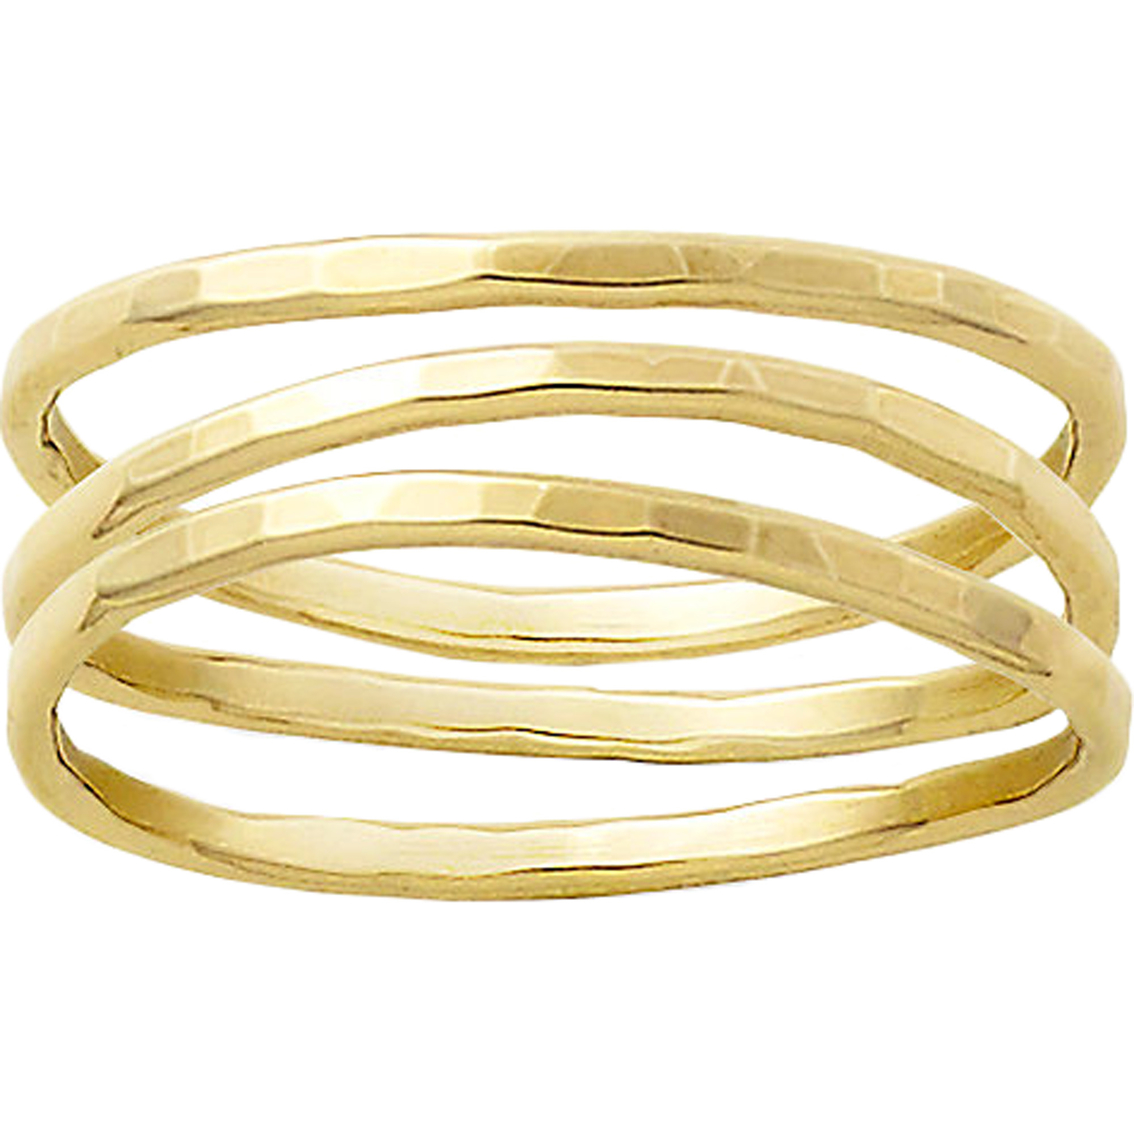 James Avery 14K Yellow Gold Delicate Forged Rings